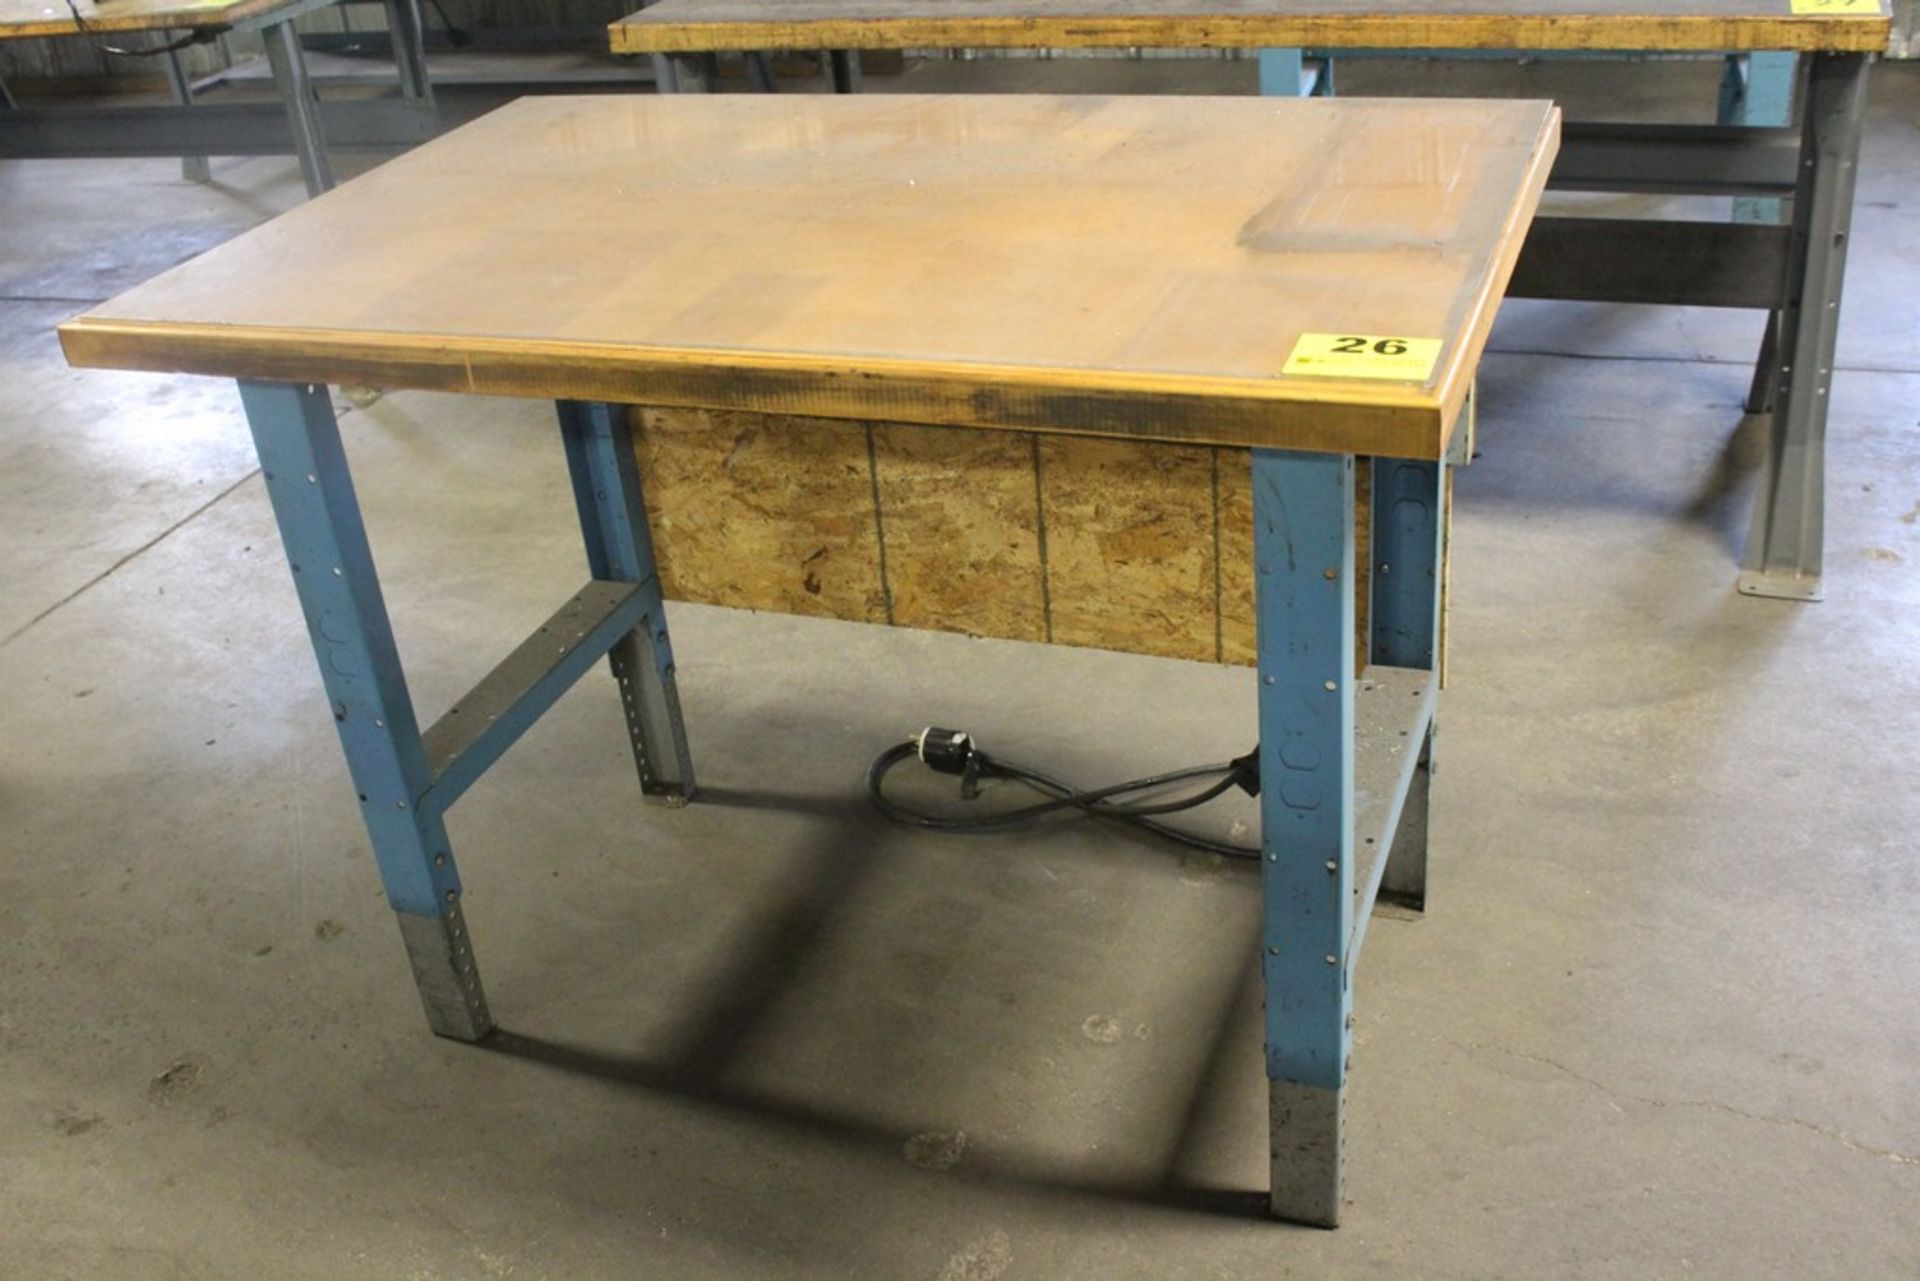 STEEL SHOP TABLE WITH WOOD TOP, 36" X 49" X 30-1/2", WITH ADJUSTABLE LEGS AND POWER OUTLET